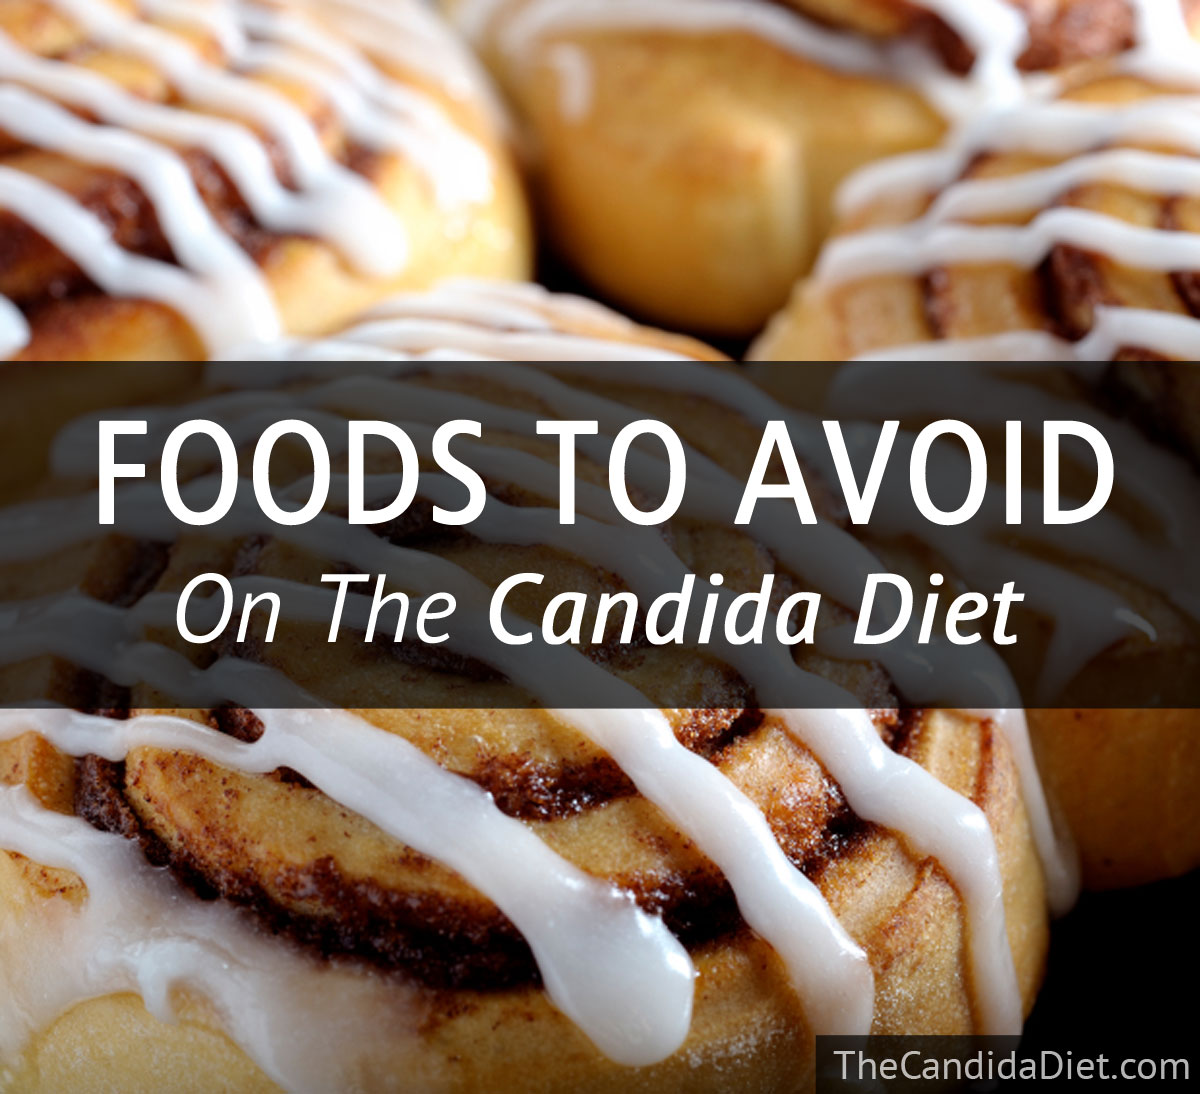 Foods To Avoid On The Candida Diet